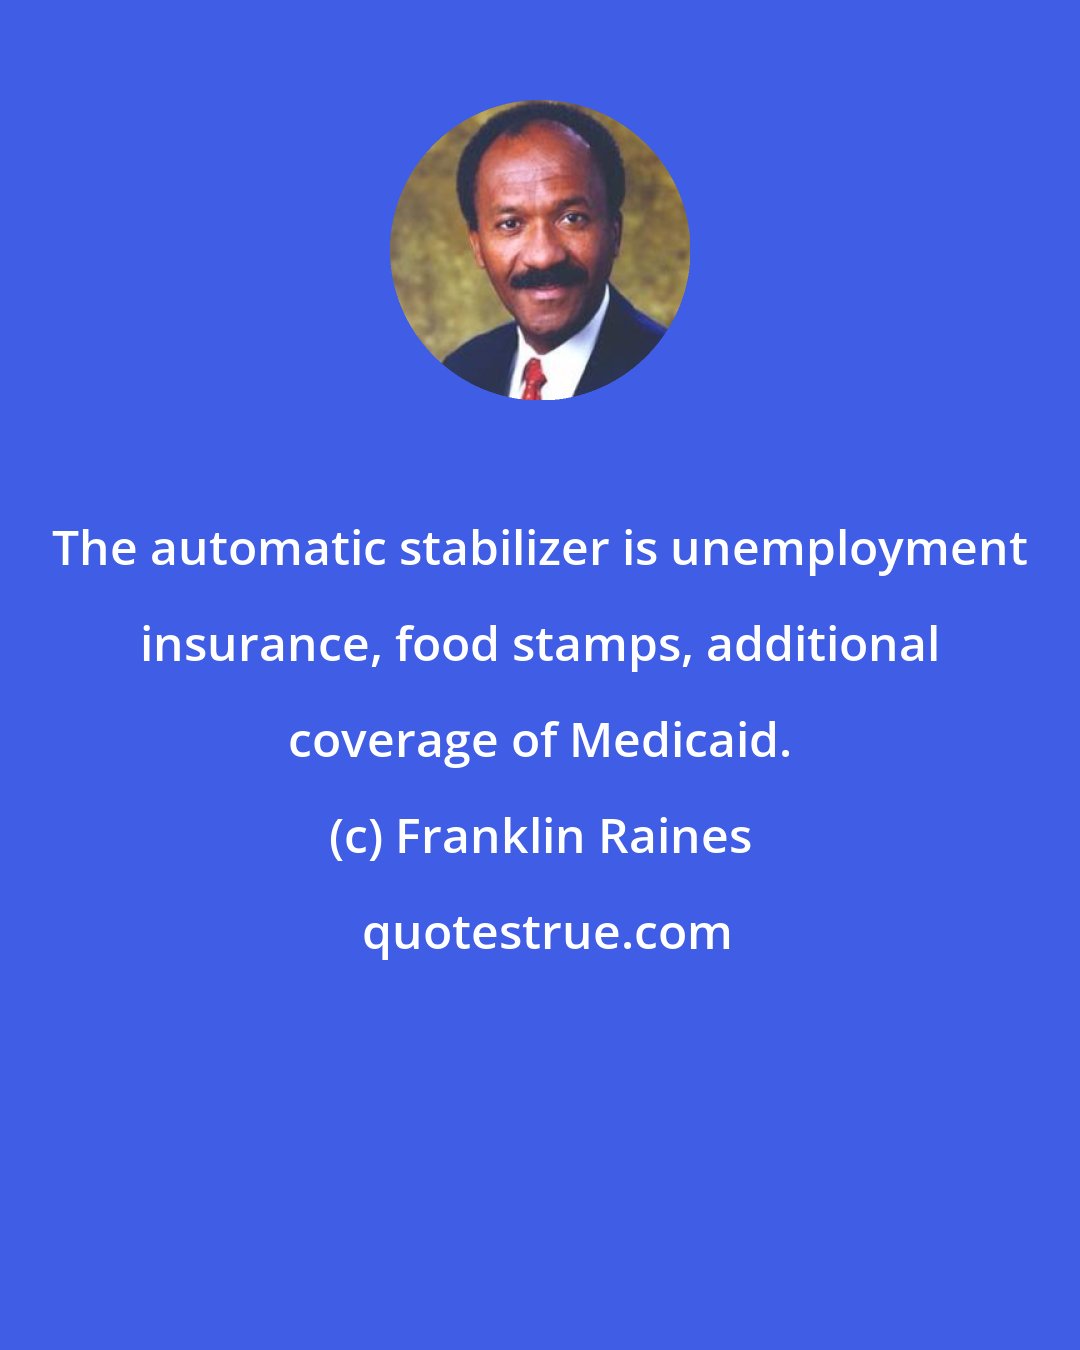 Franklin Raines: The automatic stabilizer is unemployment insurance, food stamps, additional coverage of Medicaid.